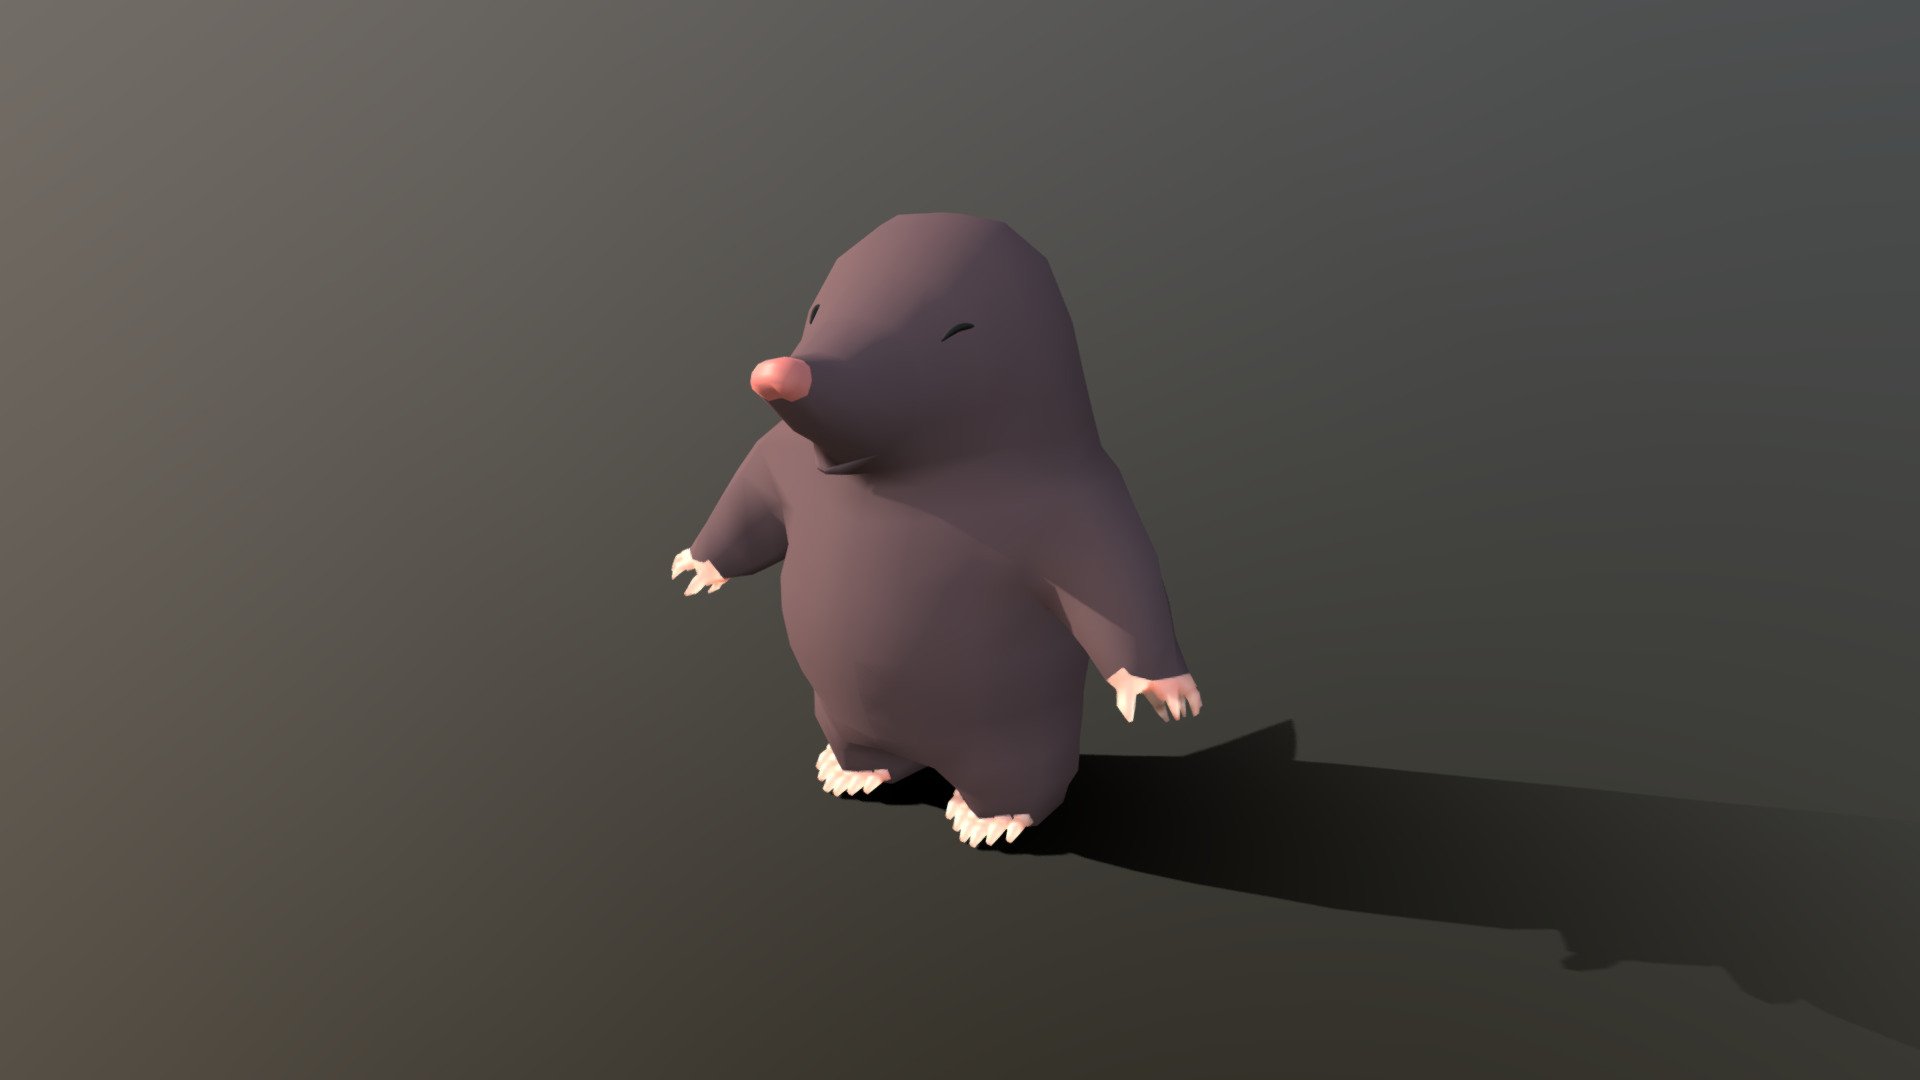 Mole model and animations made using Blender.

For &ldquo;Rock'n'Mole